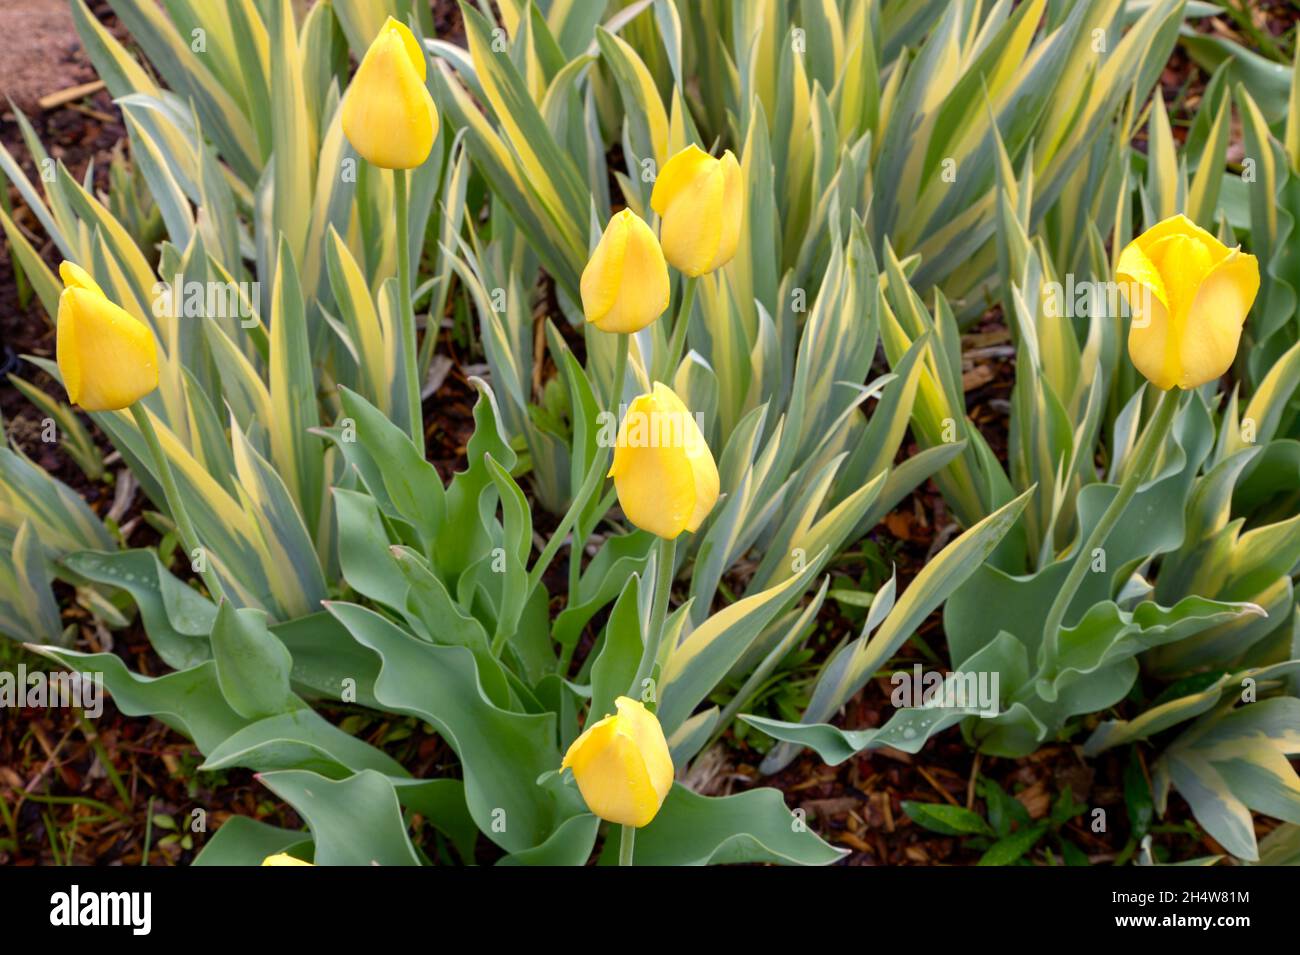 Yellow tulips are mixed with the sword like leaves of Iris pallida, commonly called Zebra Iris. Stock Photo